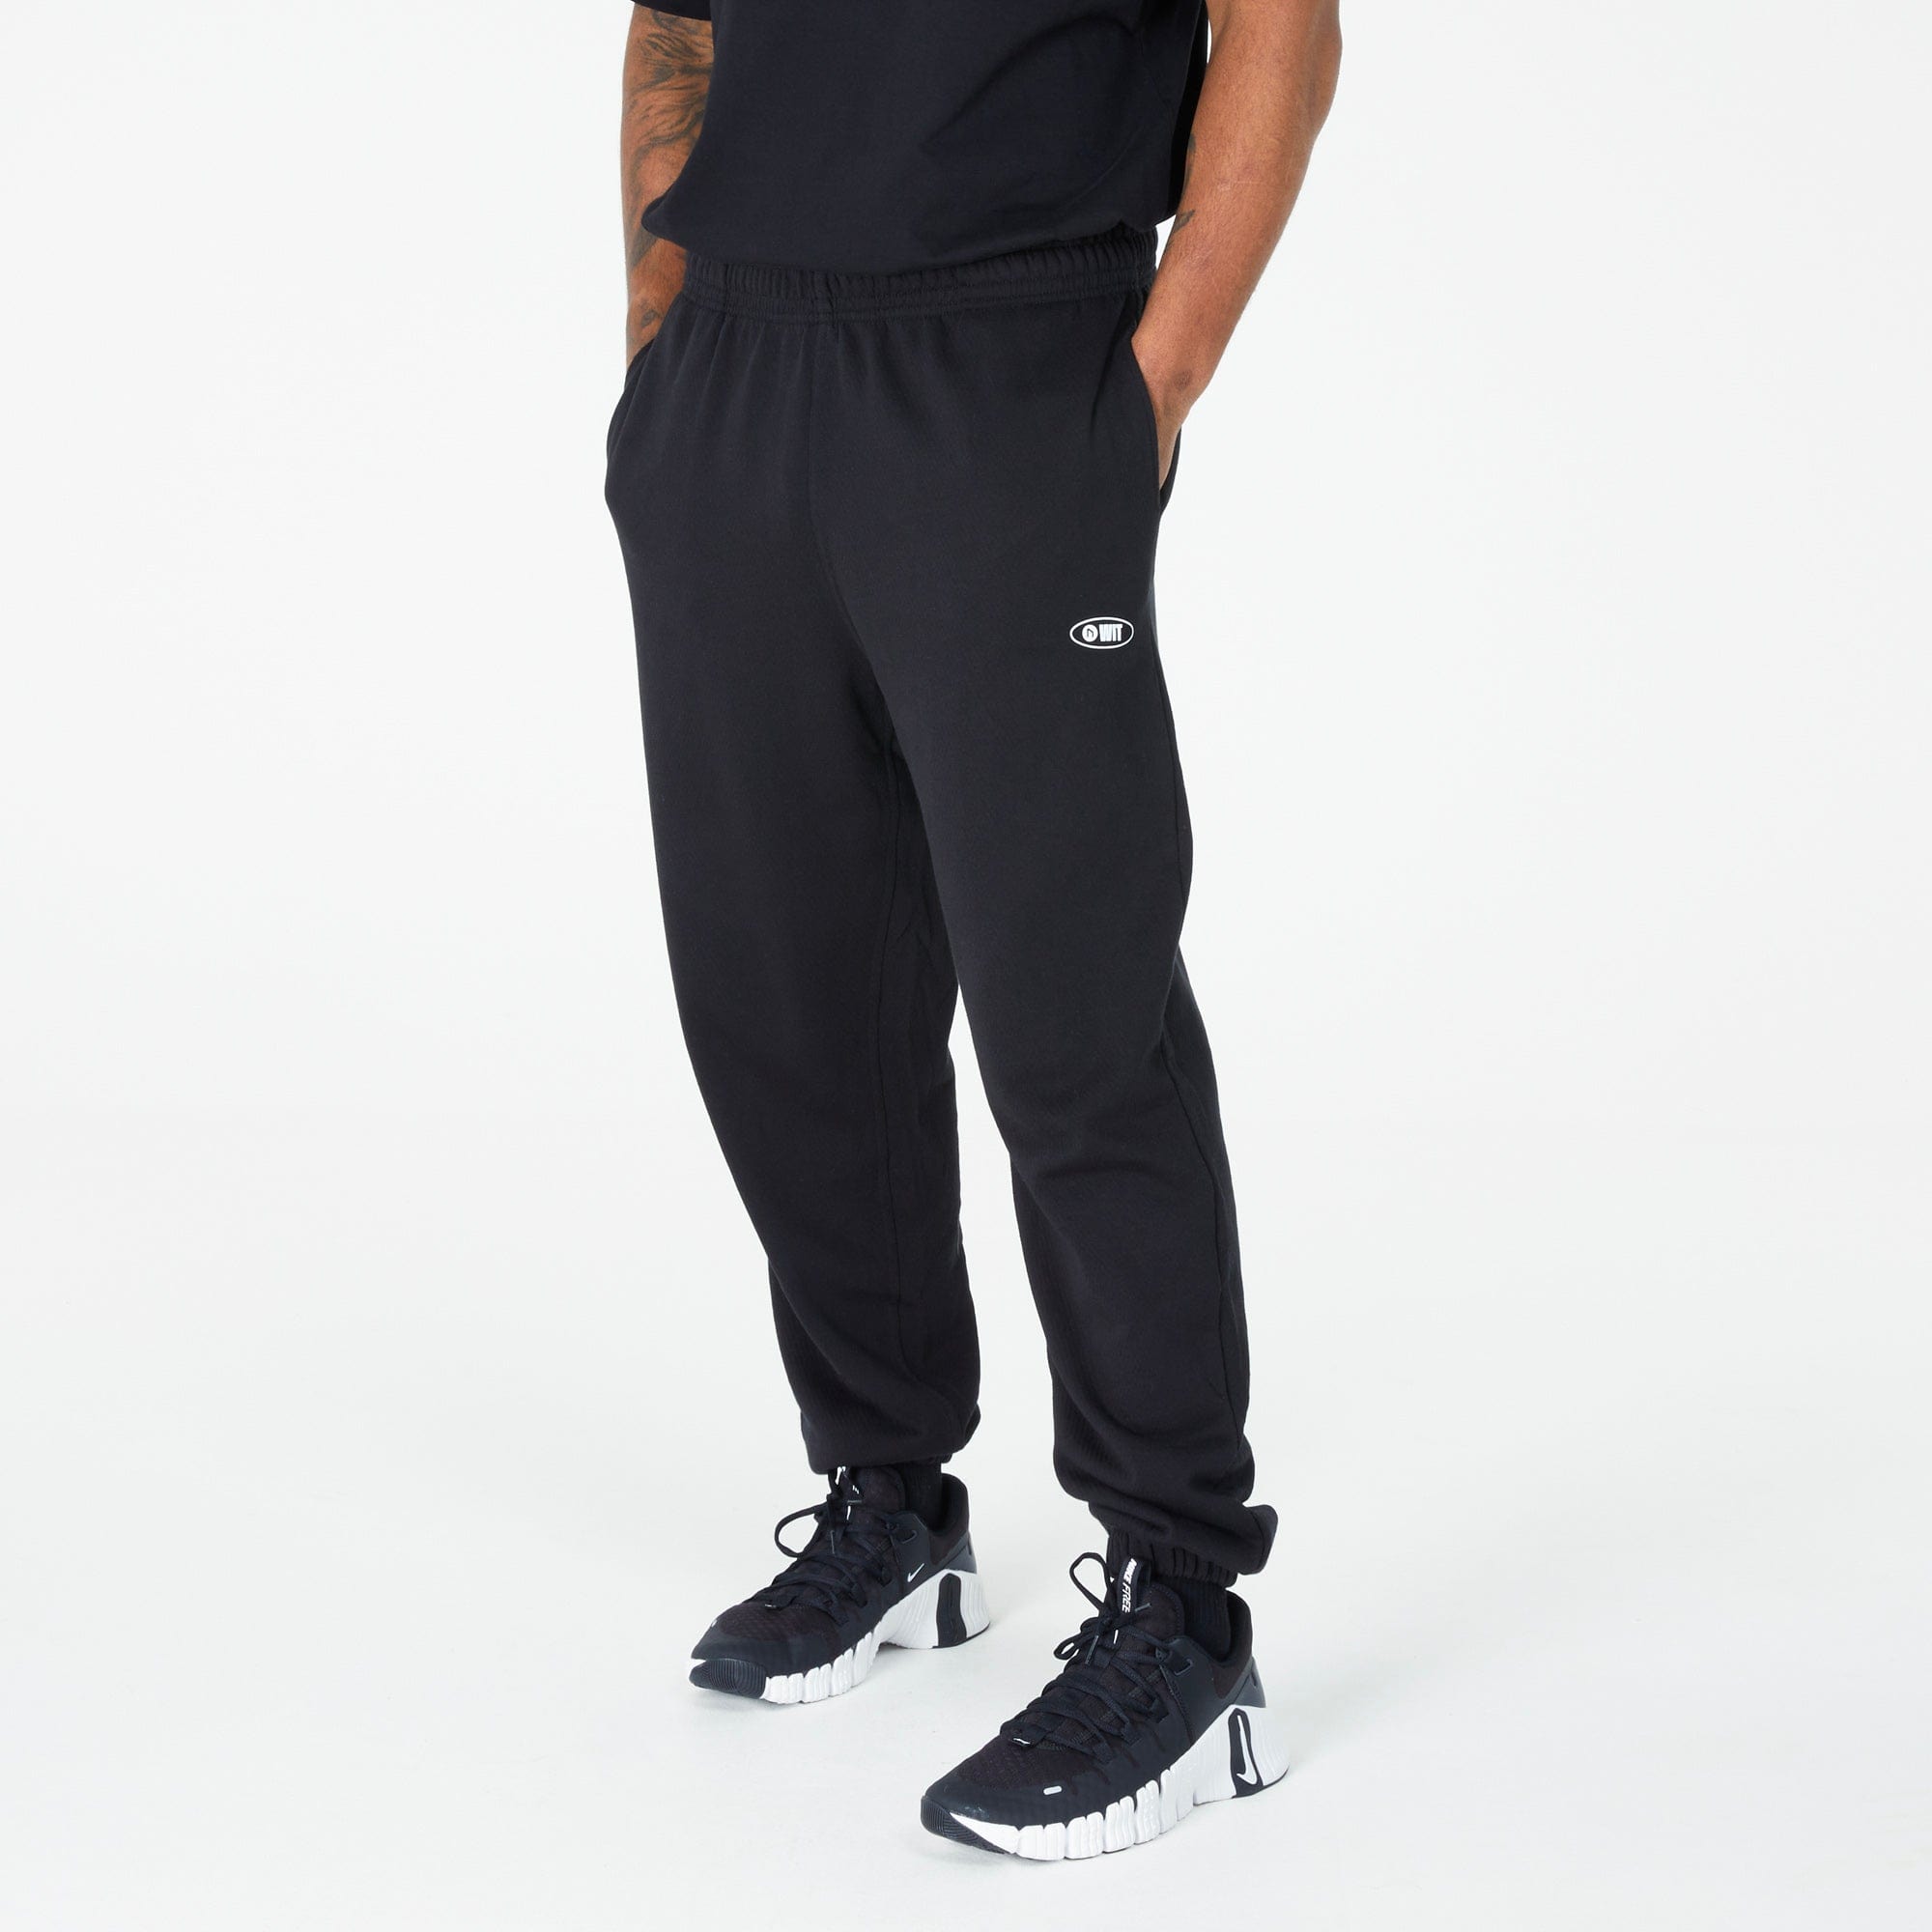 WIT Fitness Tracksuits WIT Transformation Jogger in Black and Bone